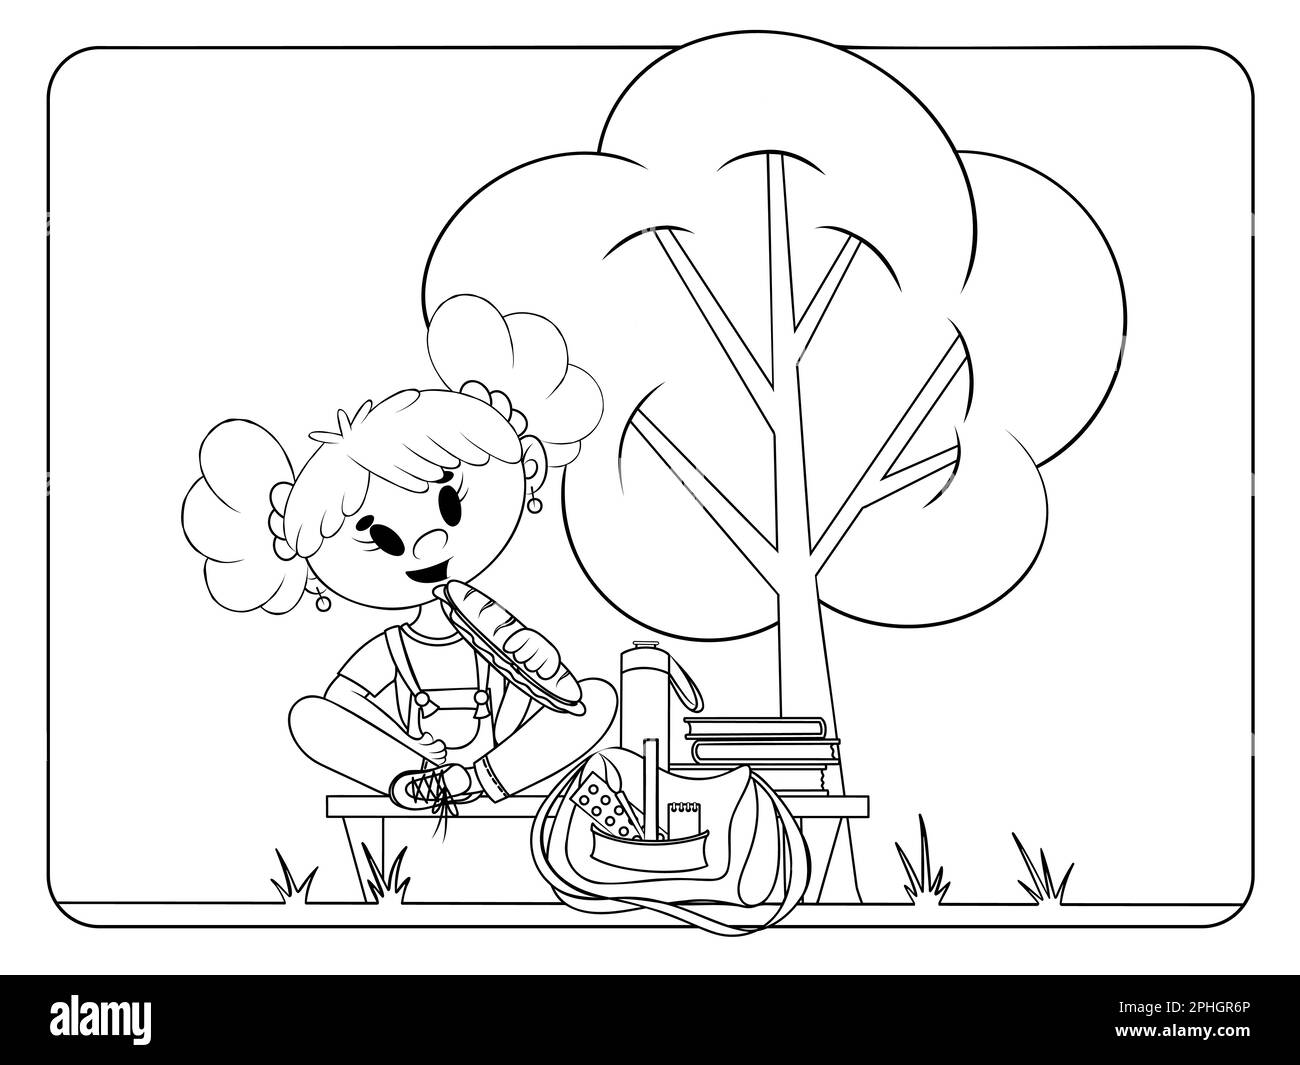 Lunch time at school coloring page. Girl eating at school yard. Antistress for adults and kids. Stock Vector